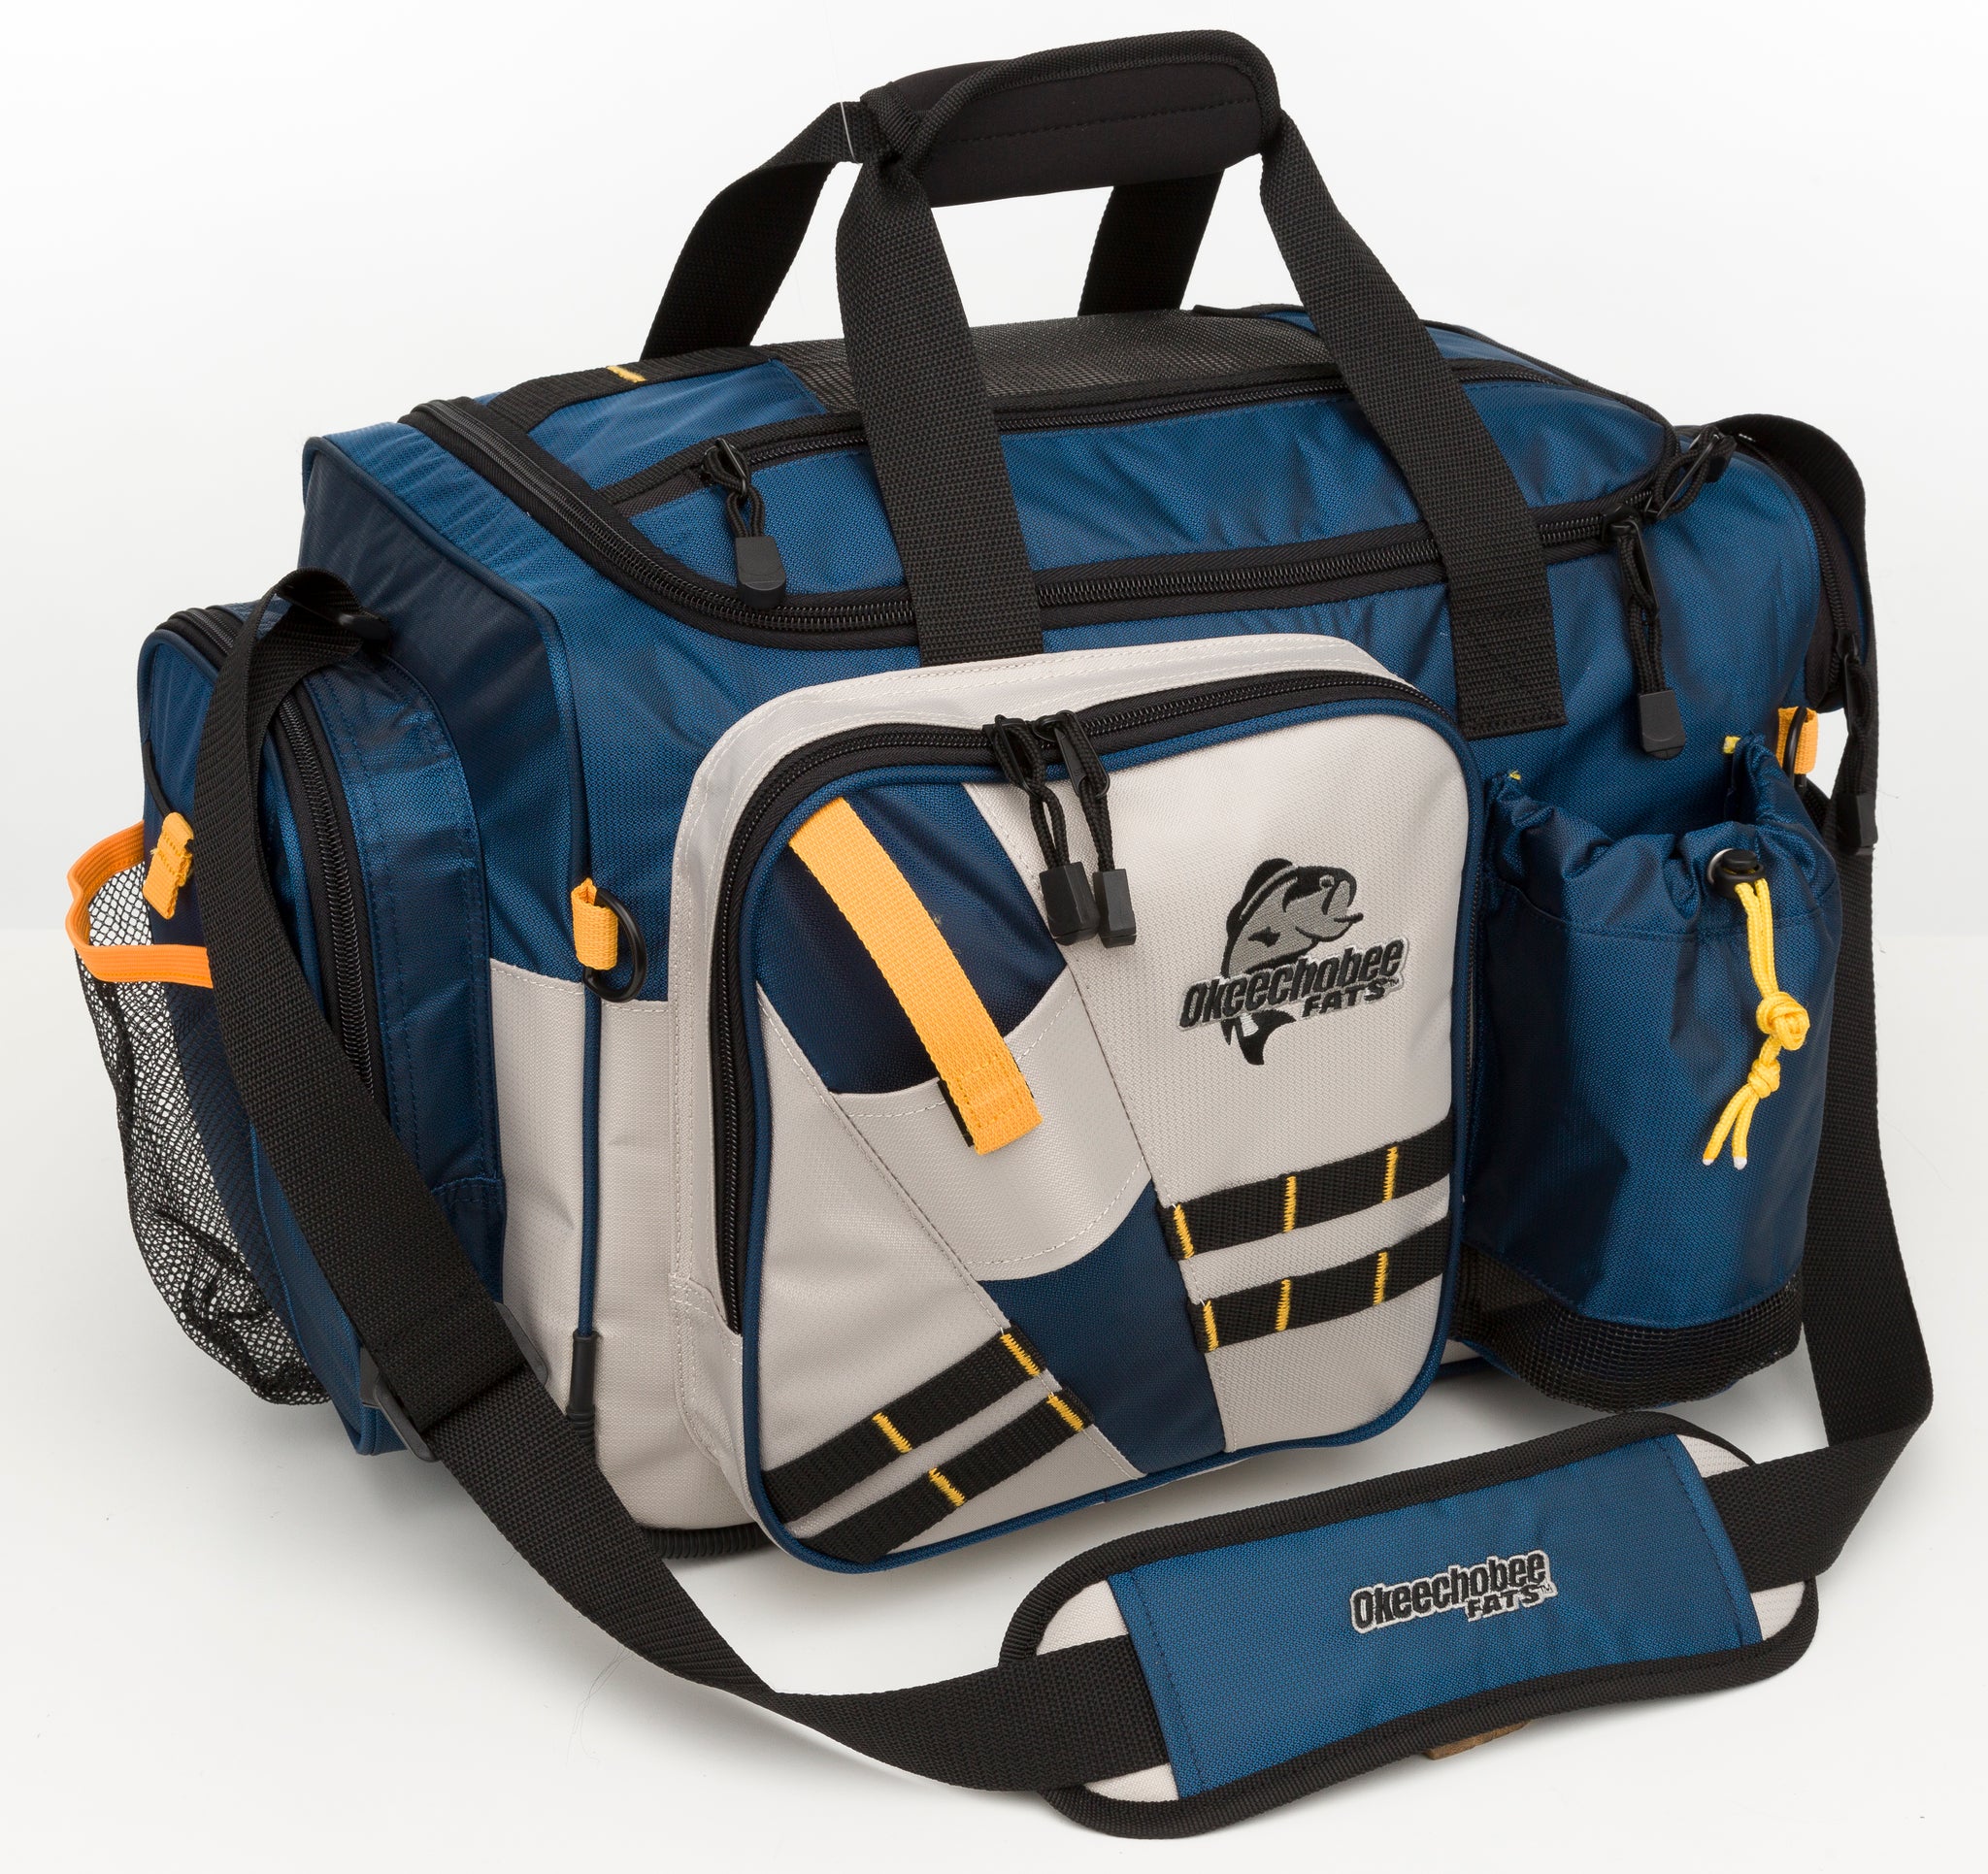 Tackle Bags For Fly Fishing, Fishing Bags & Luggage